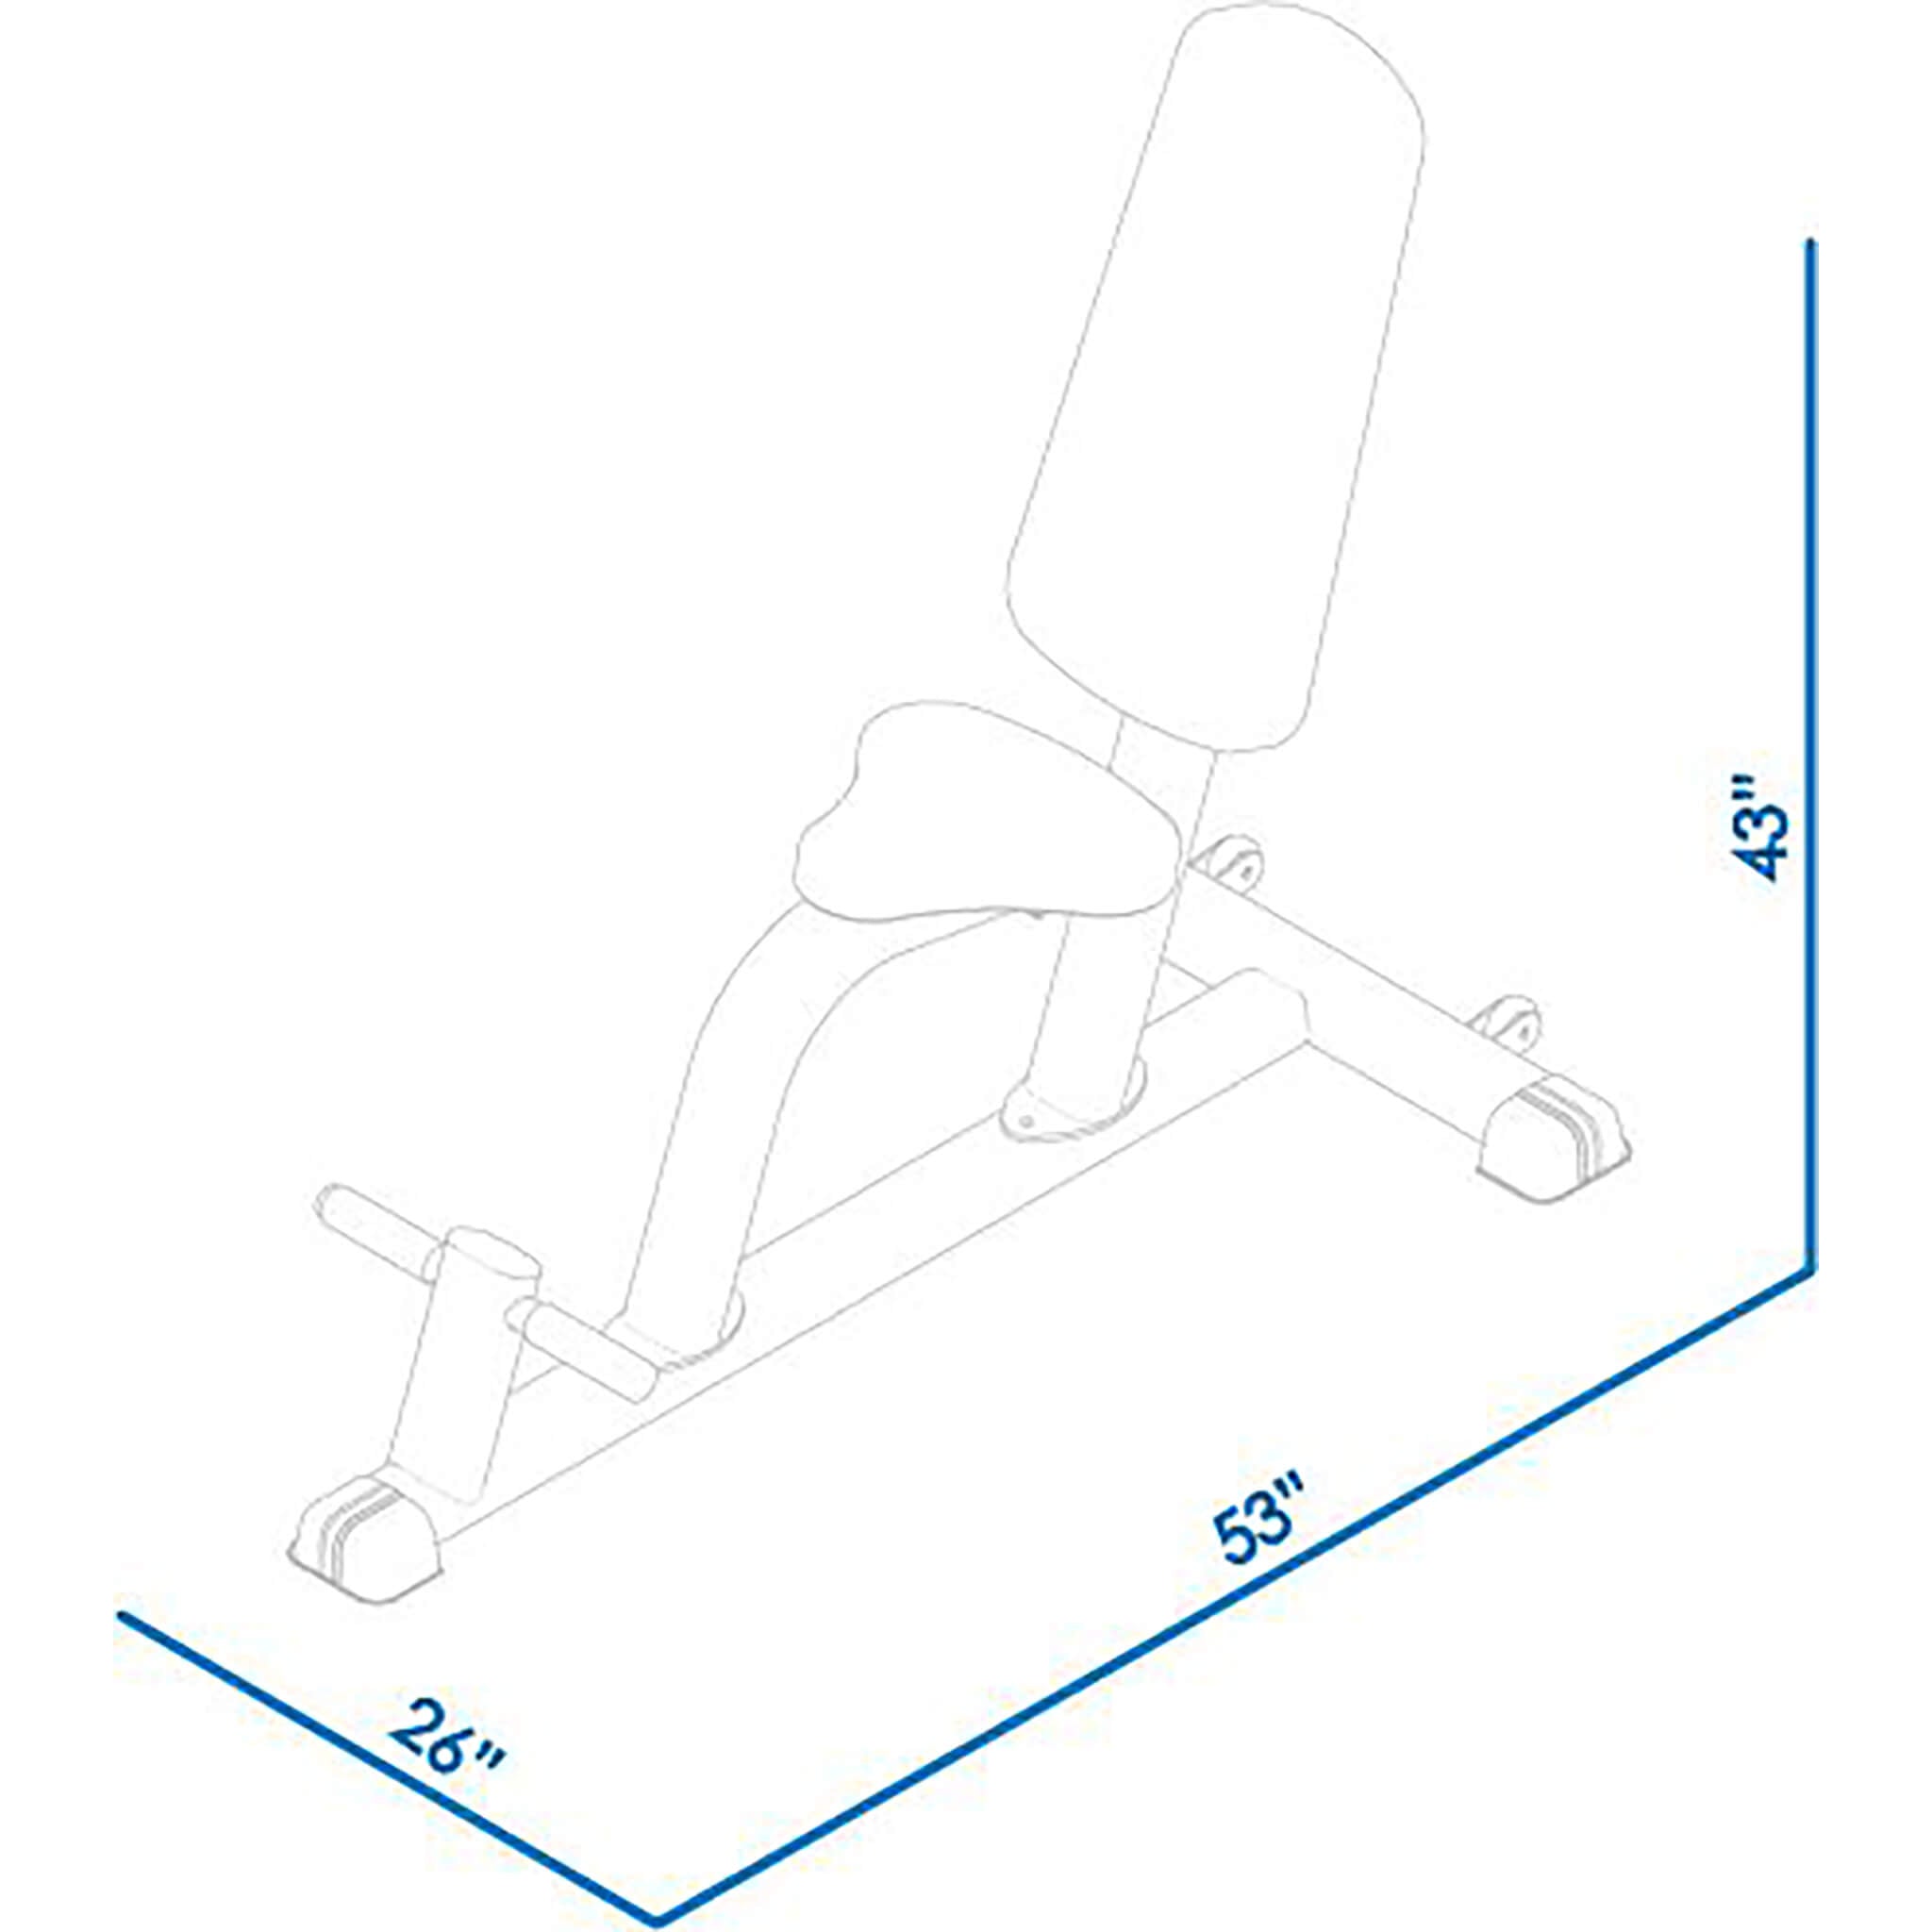 g202 utility bench dimensions